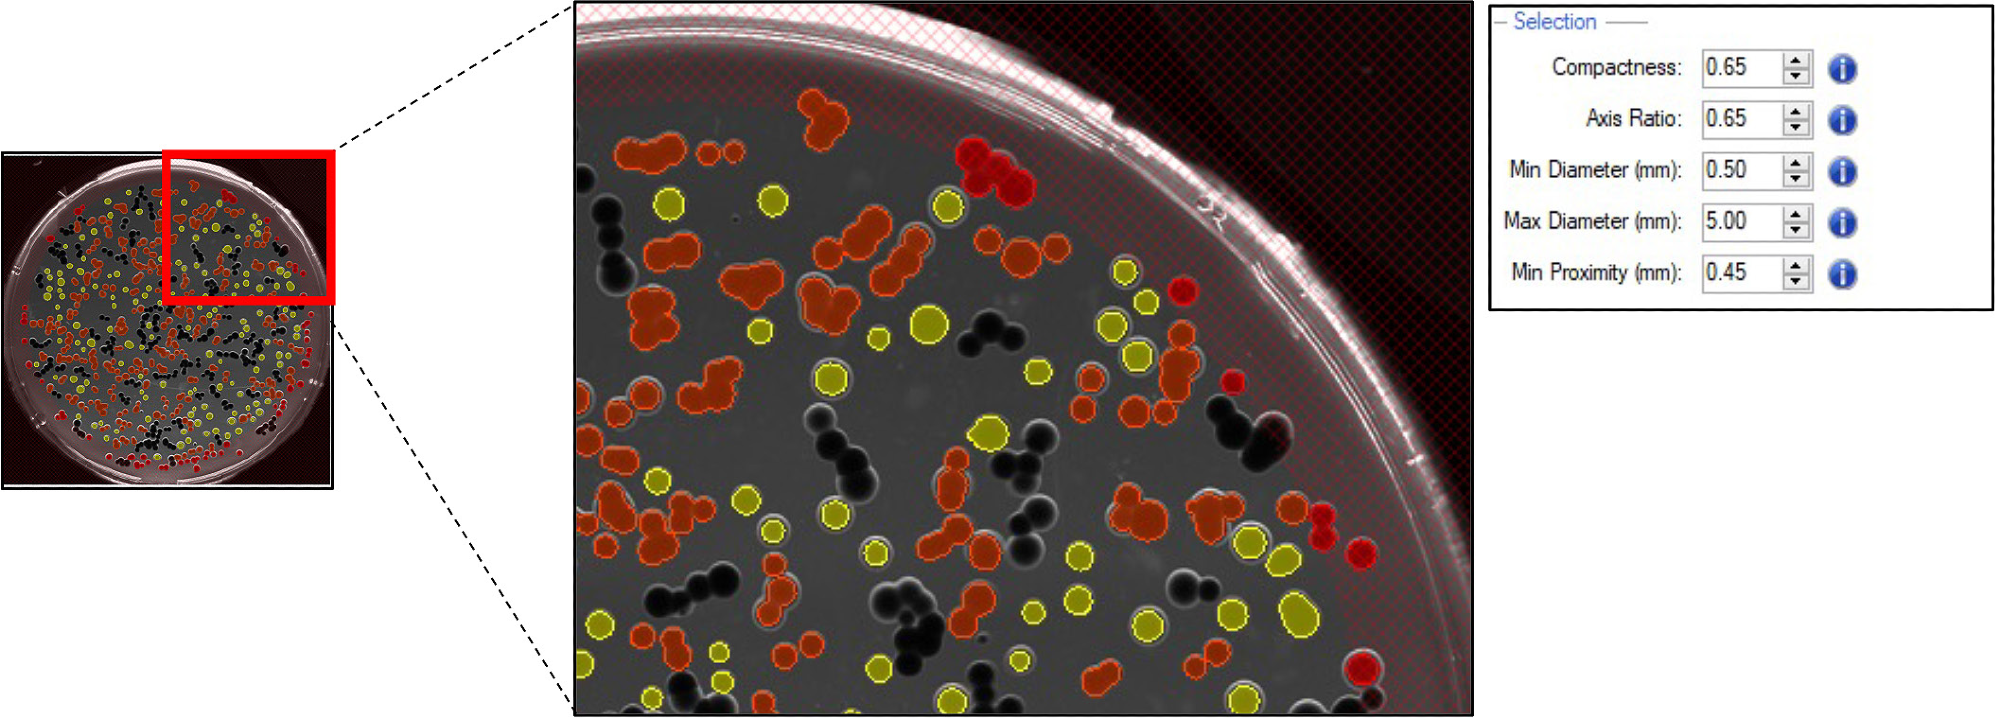 Pickable colonies are displayed in yellow. Orange: colonies excluded according to selection criteria. Top right panel: selection criteria defined for accurate colony picking.